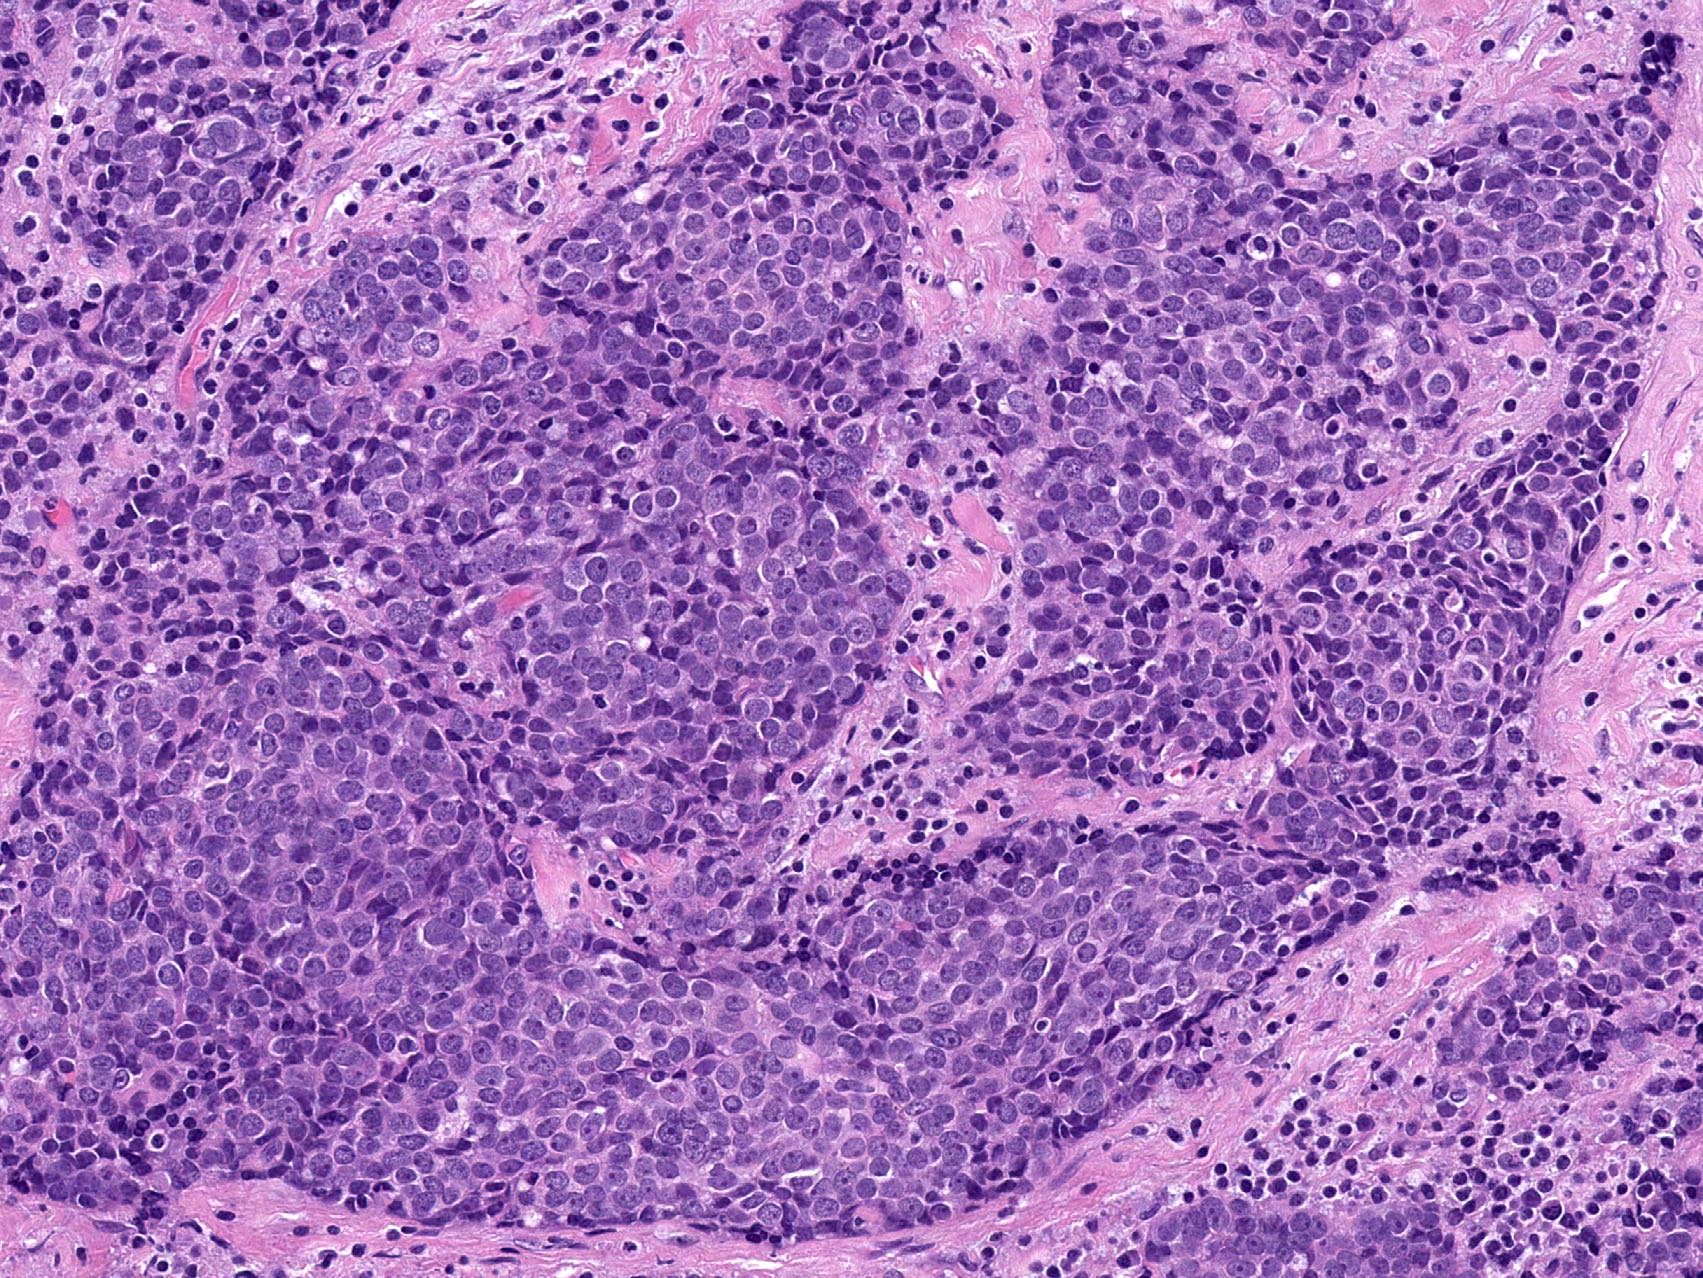 Tumor nests and fibrosis